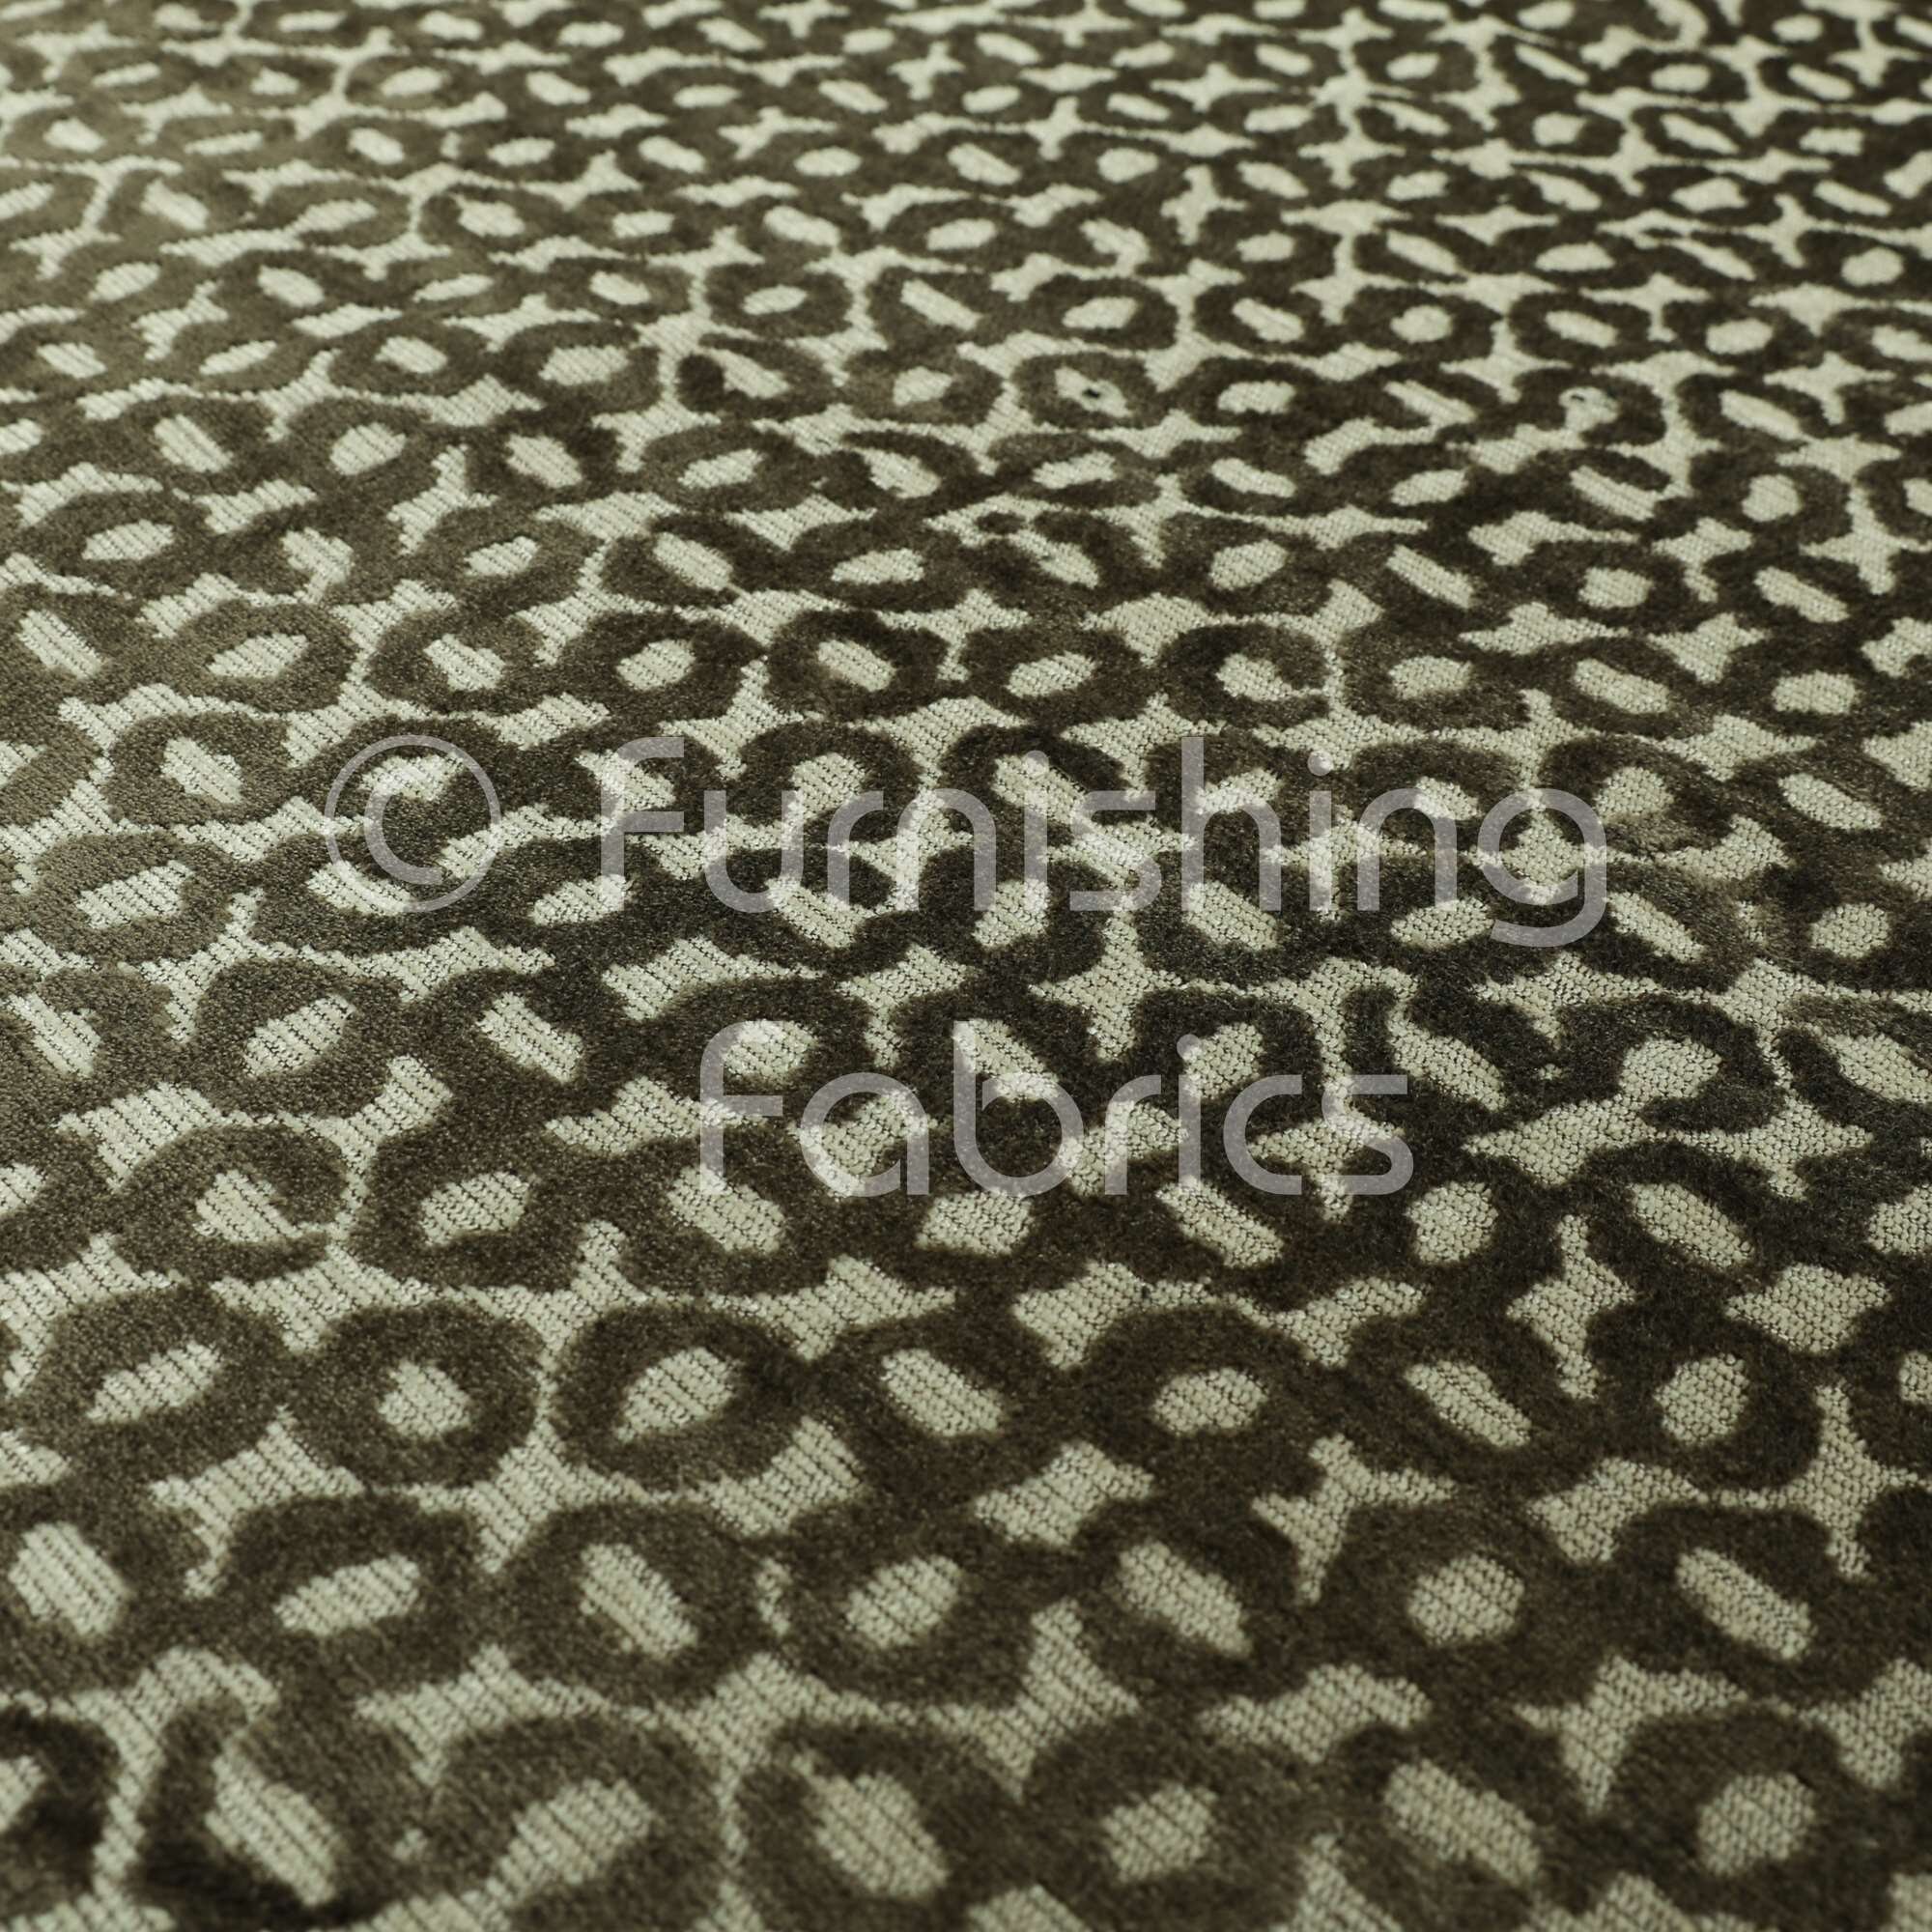 Princess BROWN Polyester Spandex Stretch Velvet Fabric by the Yard for  Tops, Dresses, Skirts, Dance Wear, Costumes, Crafts - 10001